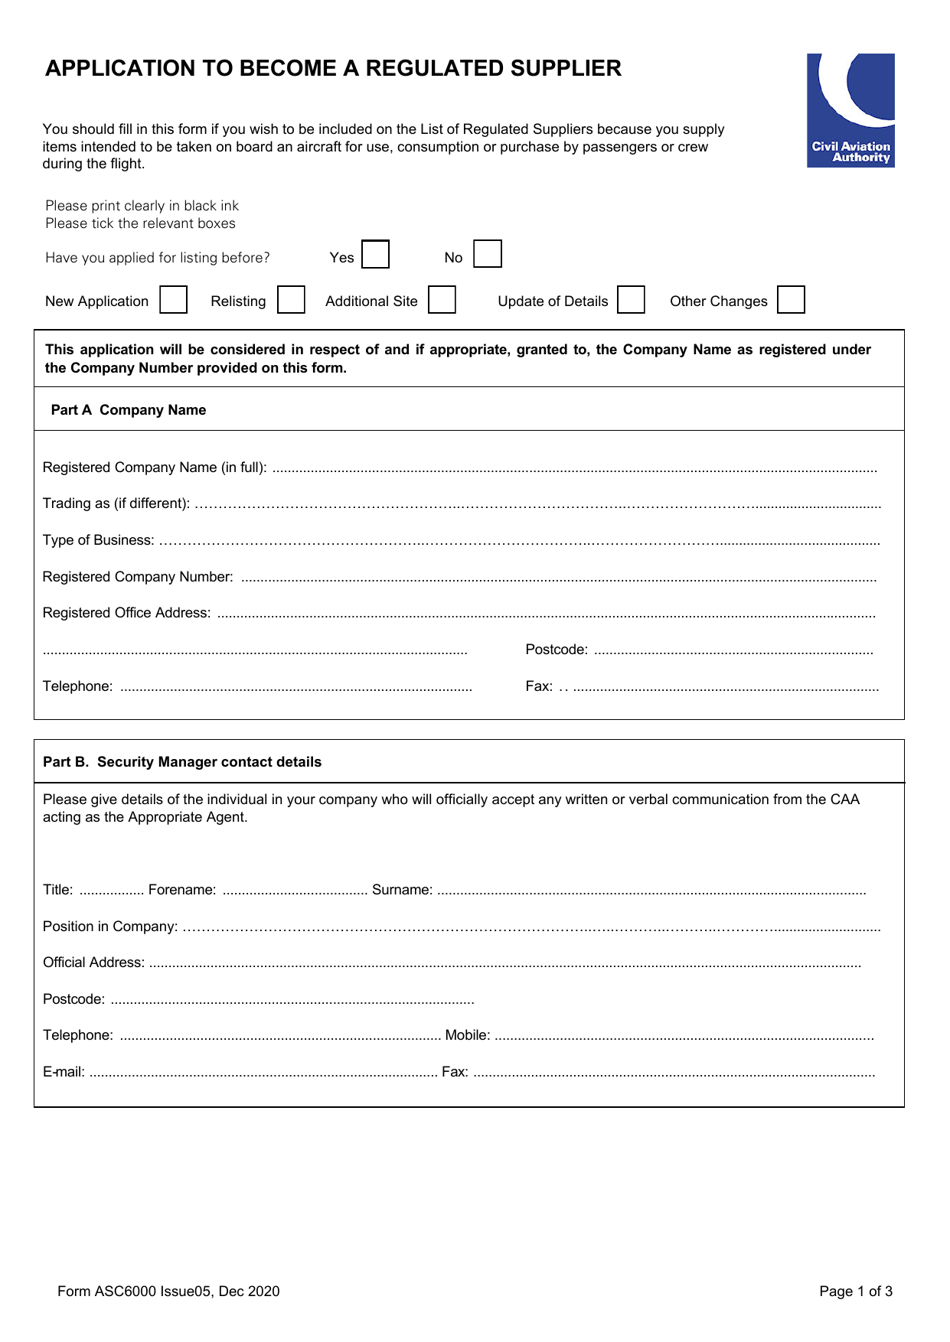 Form ASC6000 Application to Become a Regulated Supplier - United Kingdom, Page 1